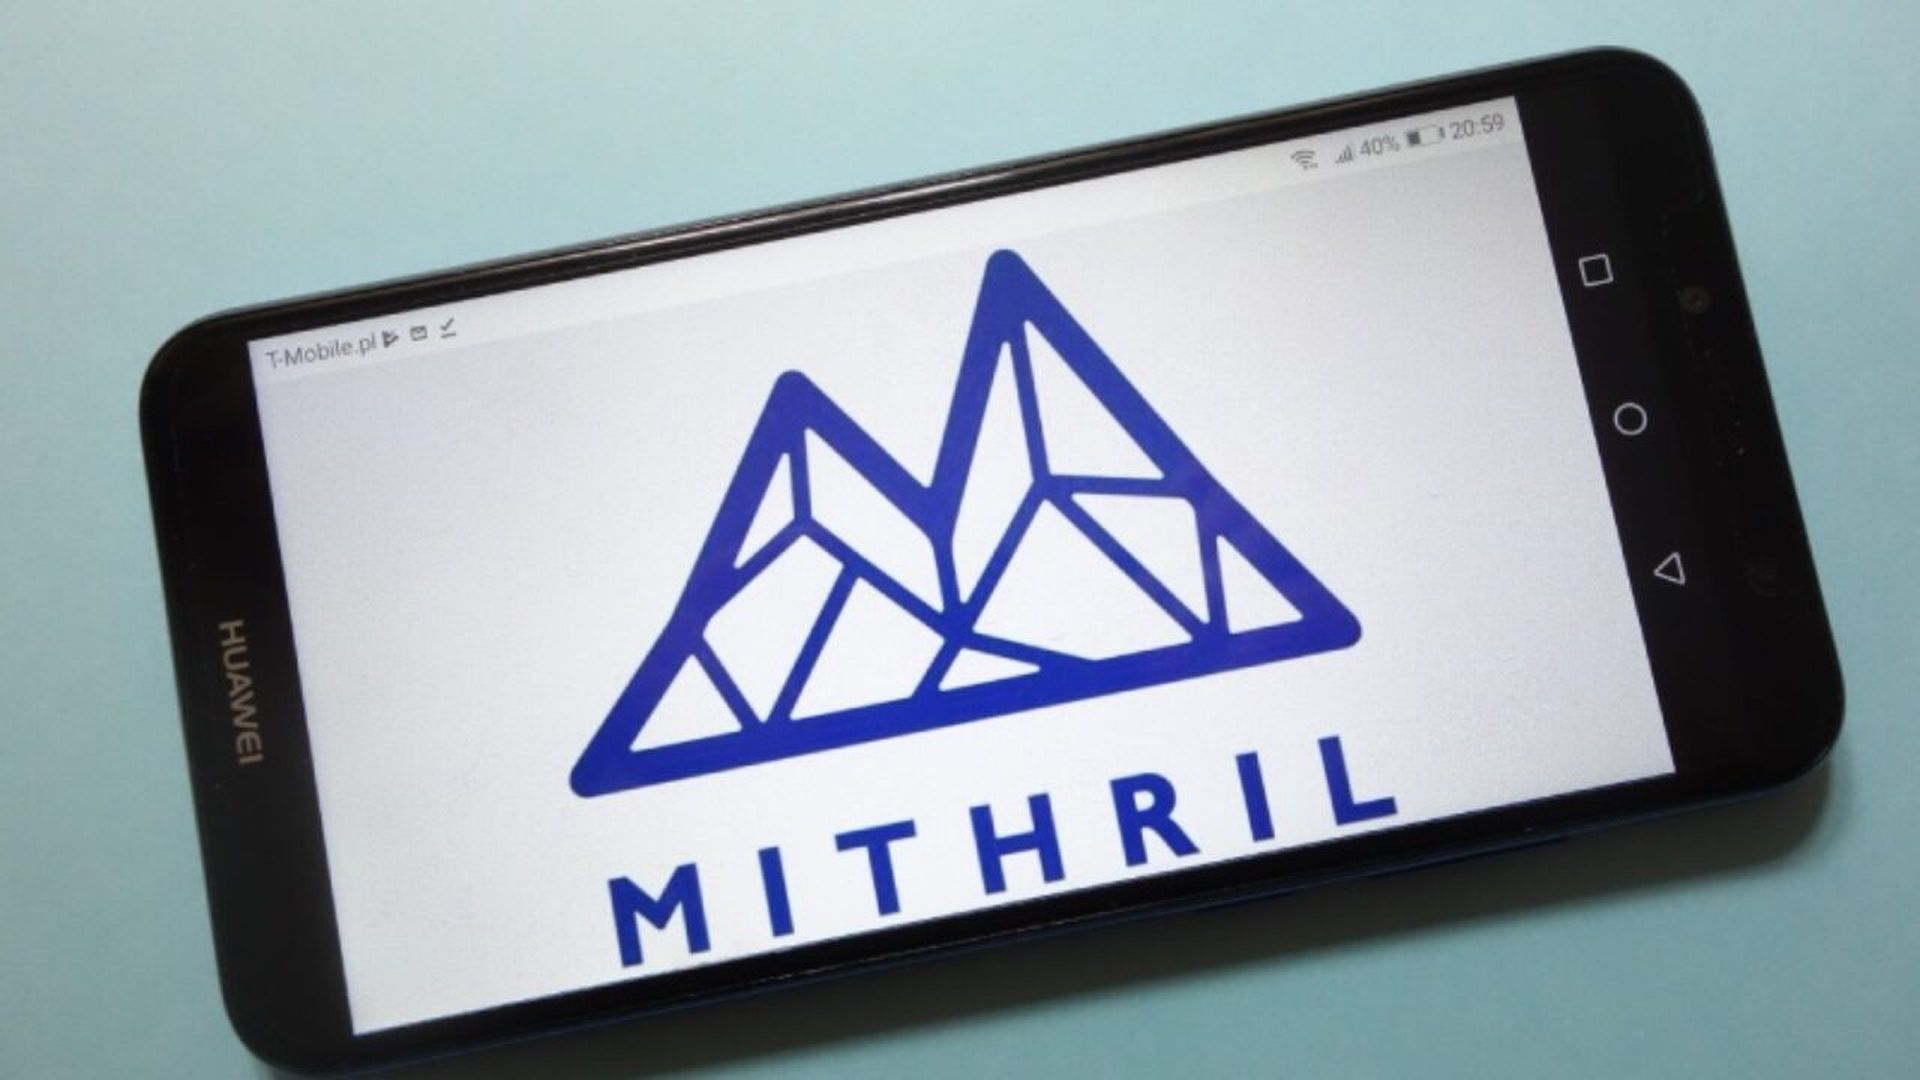 Today, we are going over what is Mithril Crypto and answering questions, such as: 'Is Mithril crypto a good investment?" and "How do I invest in Mithril?"